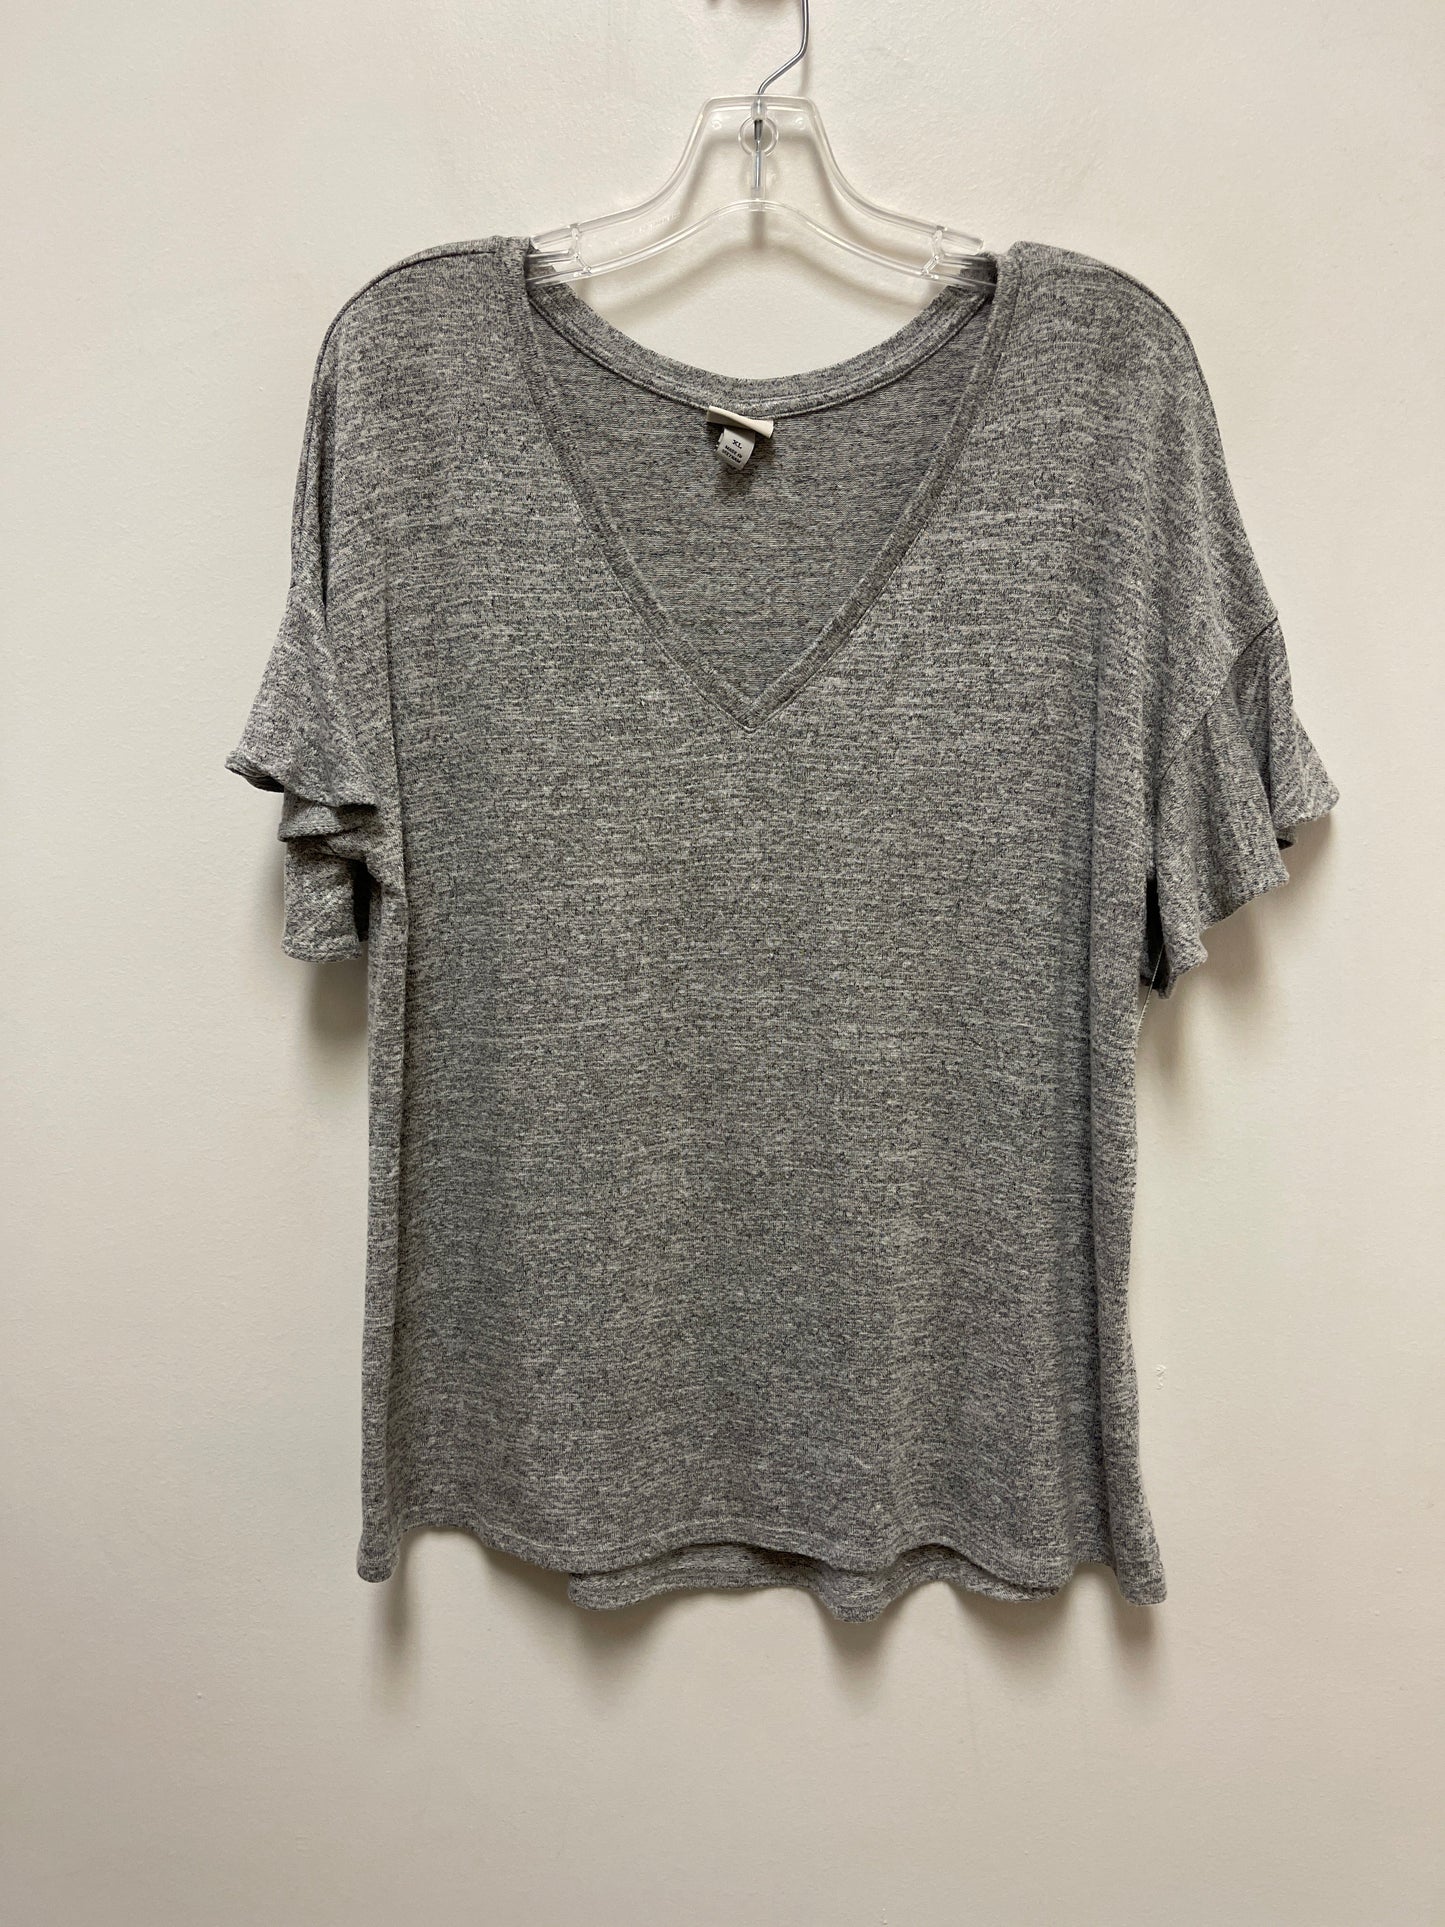 Grey Top Short Sleeve A New Day, Size Xl